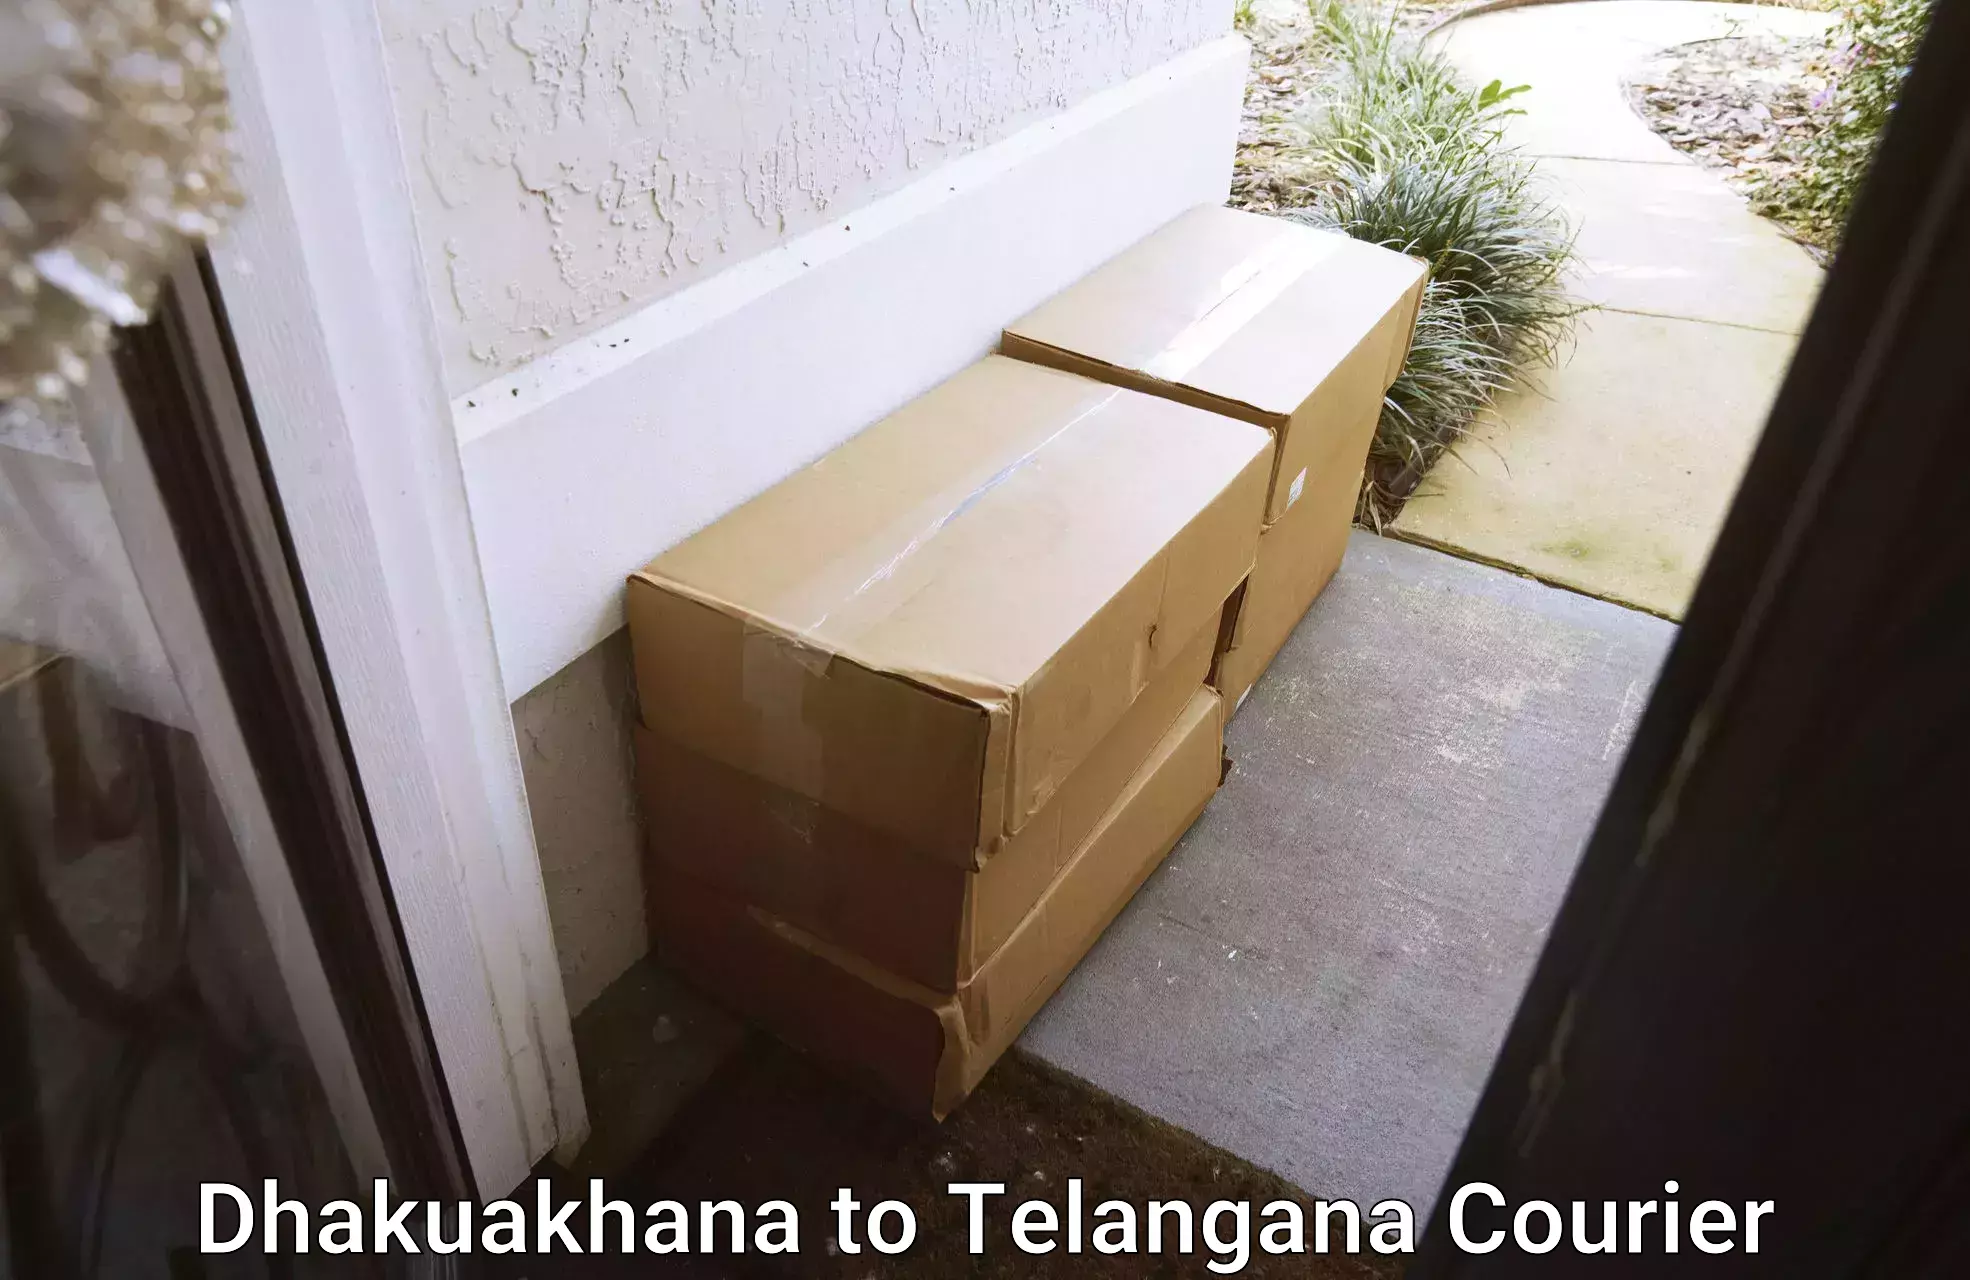 Emergency parcel delivery in Dhakuakhana to Telangana